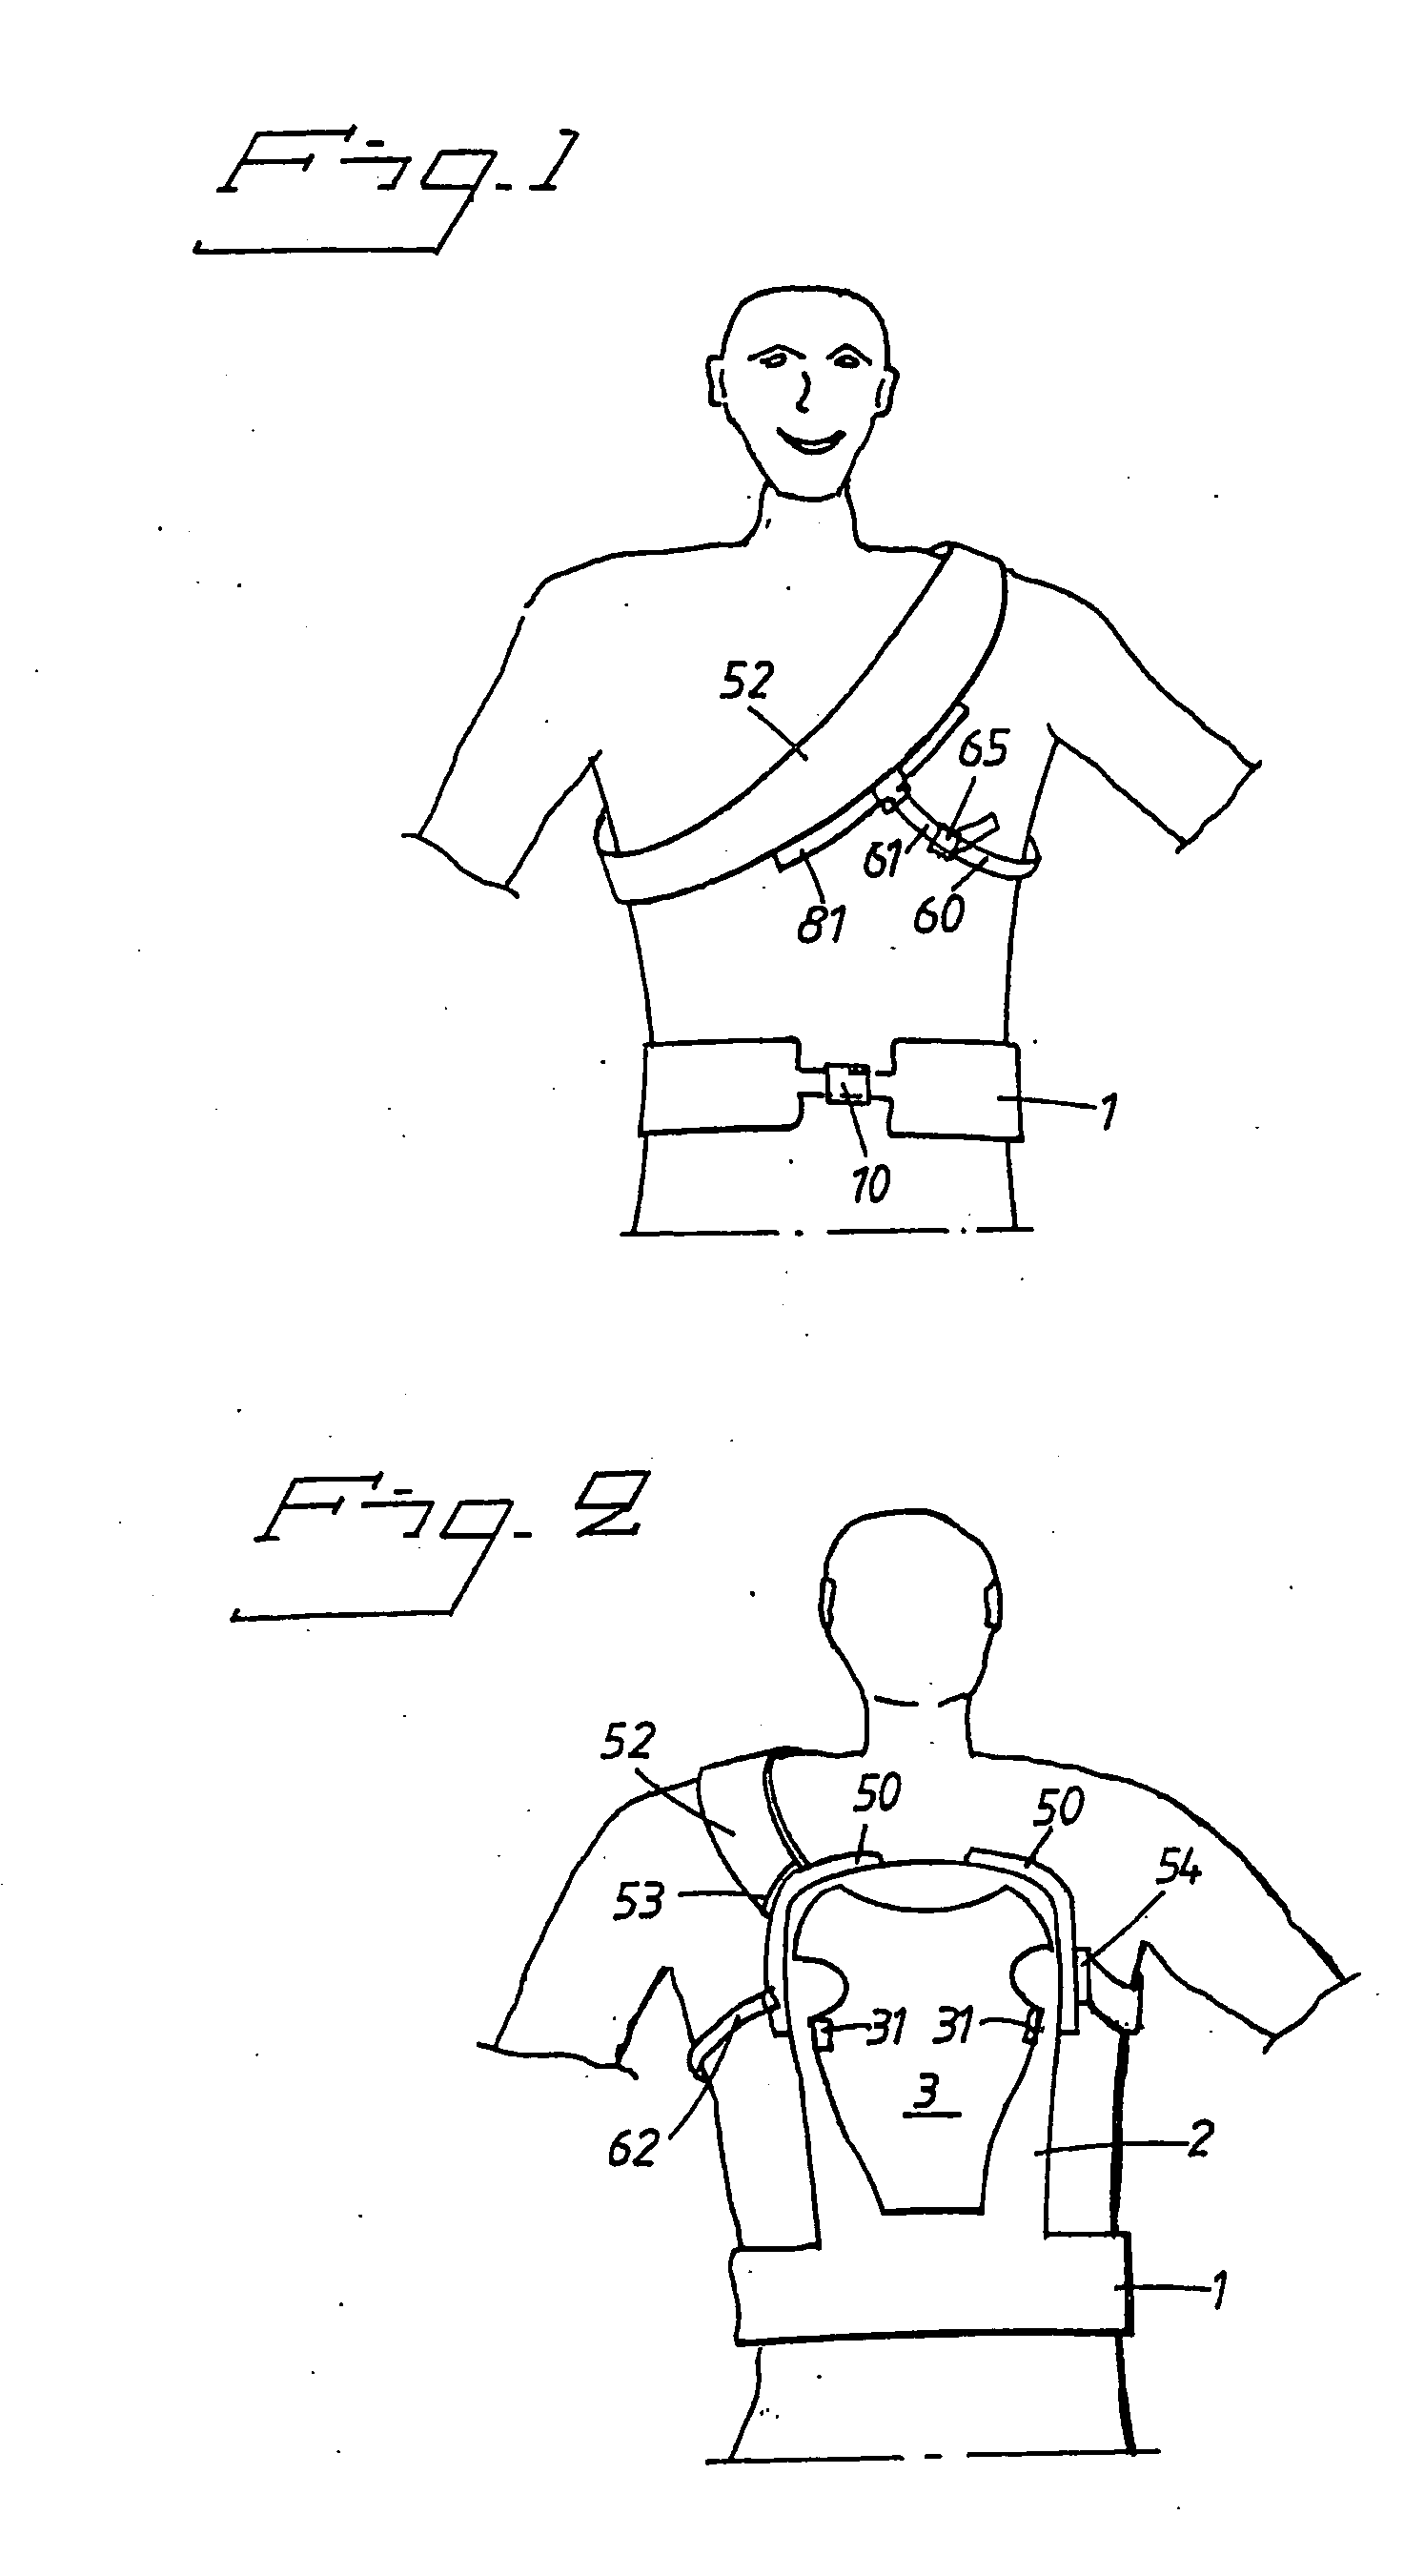 Child-carrying device